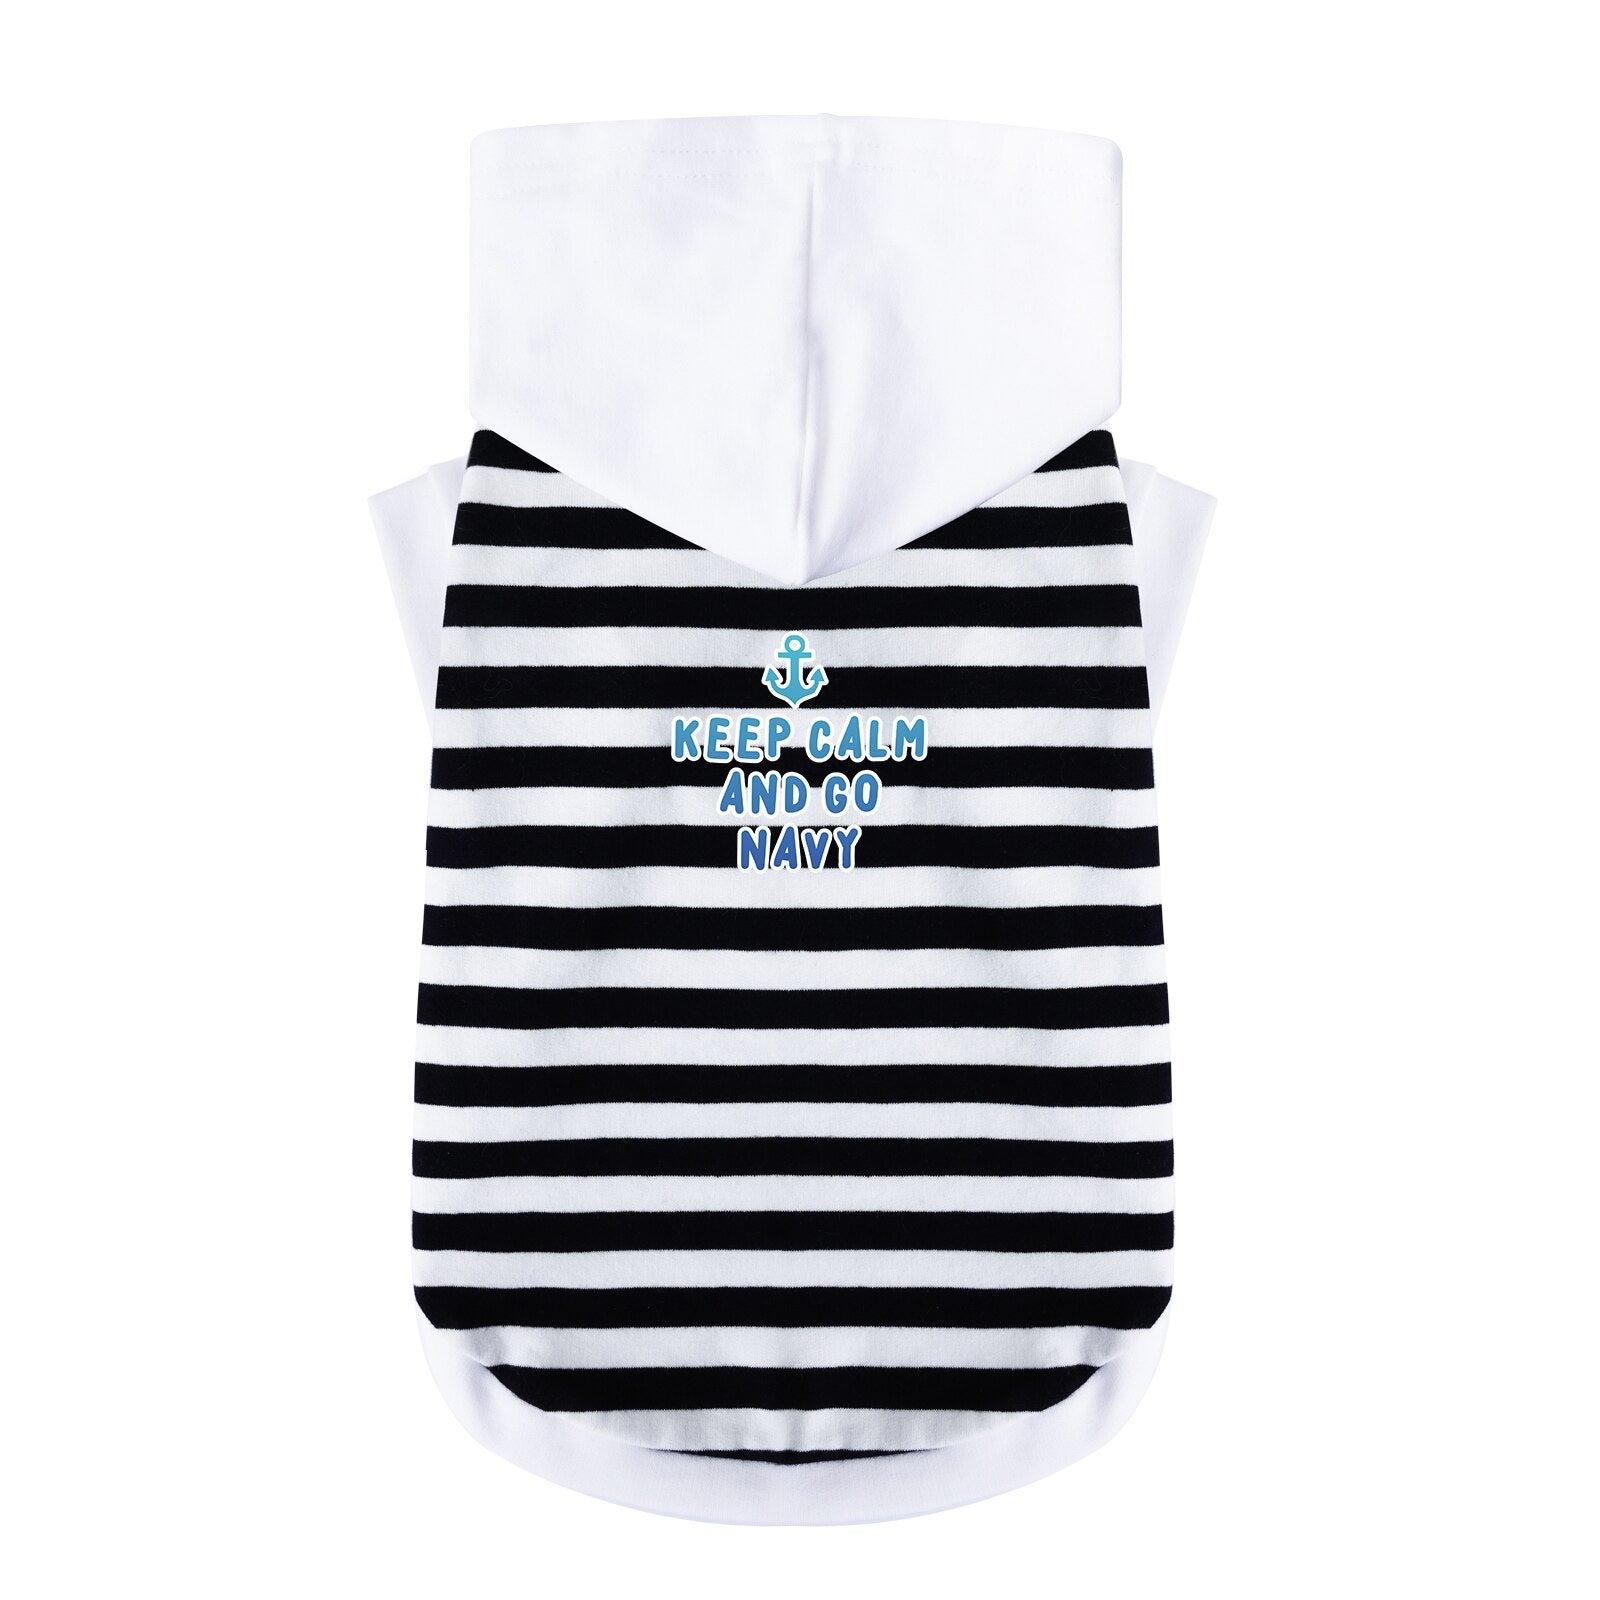 Classic Cute Dog Hoodie Pet Clothes Cotton Fabric, Stripe White and Red, Blue Letter Printed on the Back